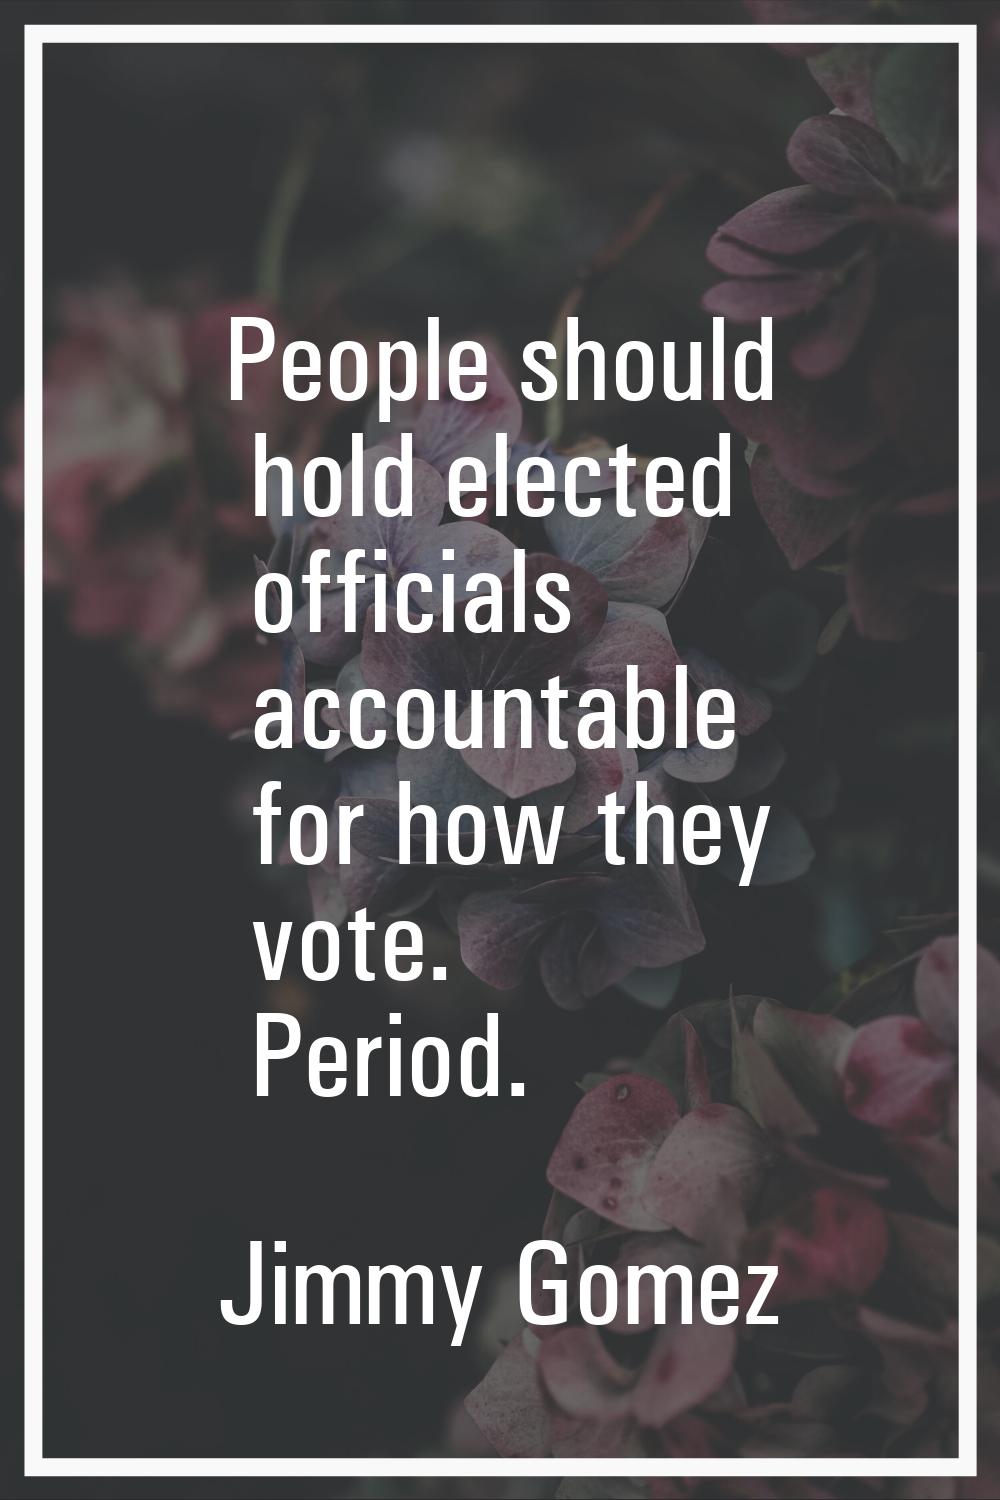 People should hold elected officials accountable for how they vote. Period.